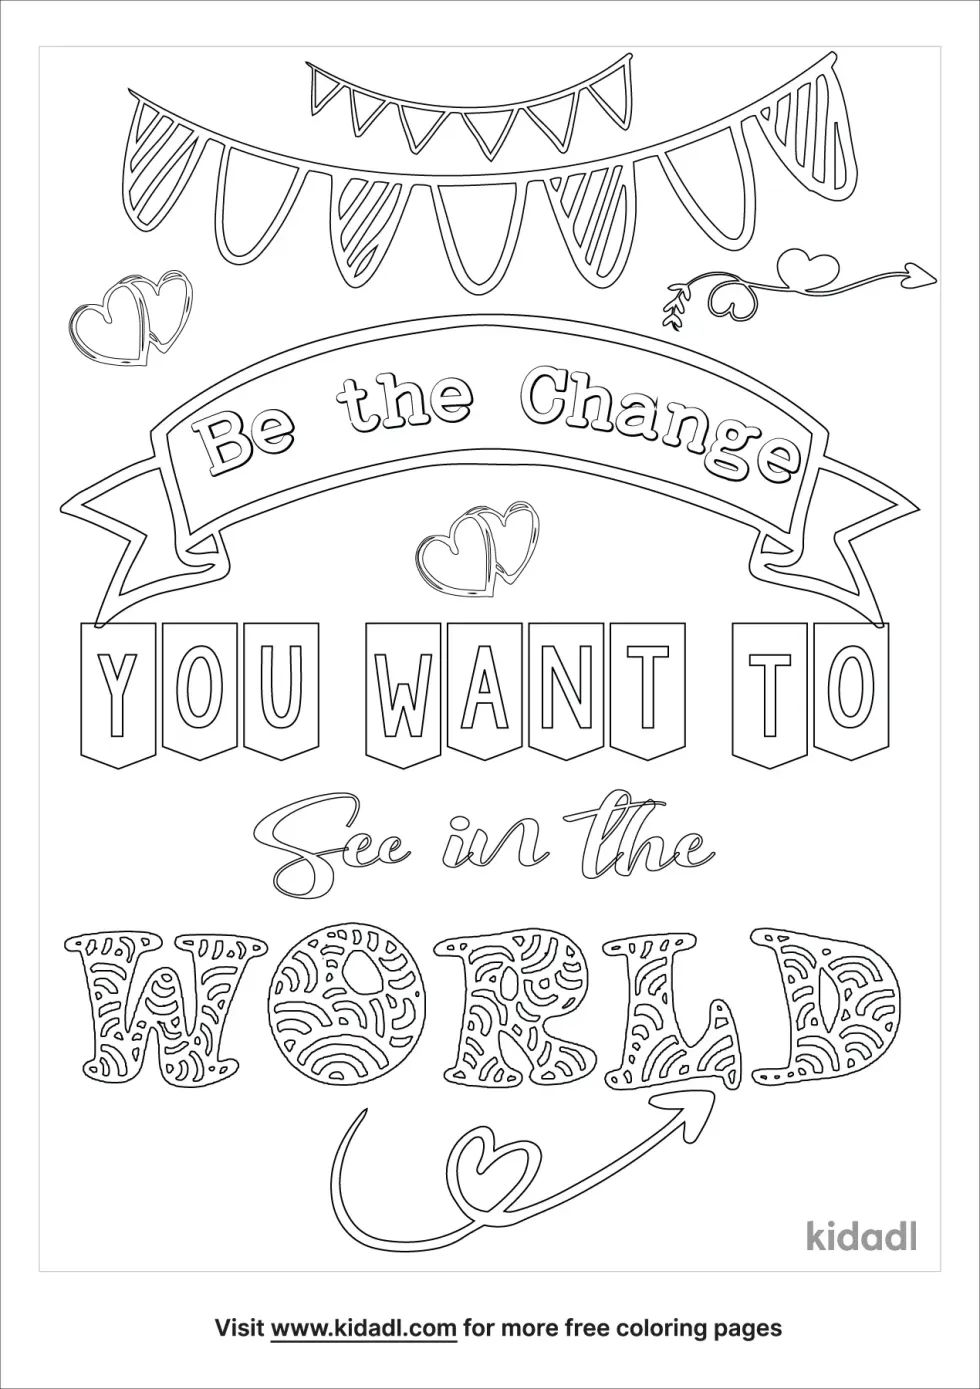 Be The Change Coloring Page